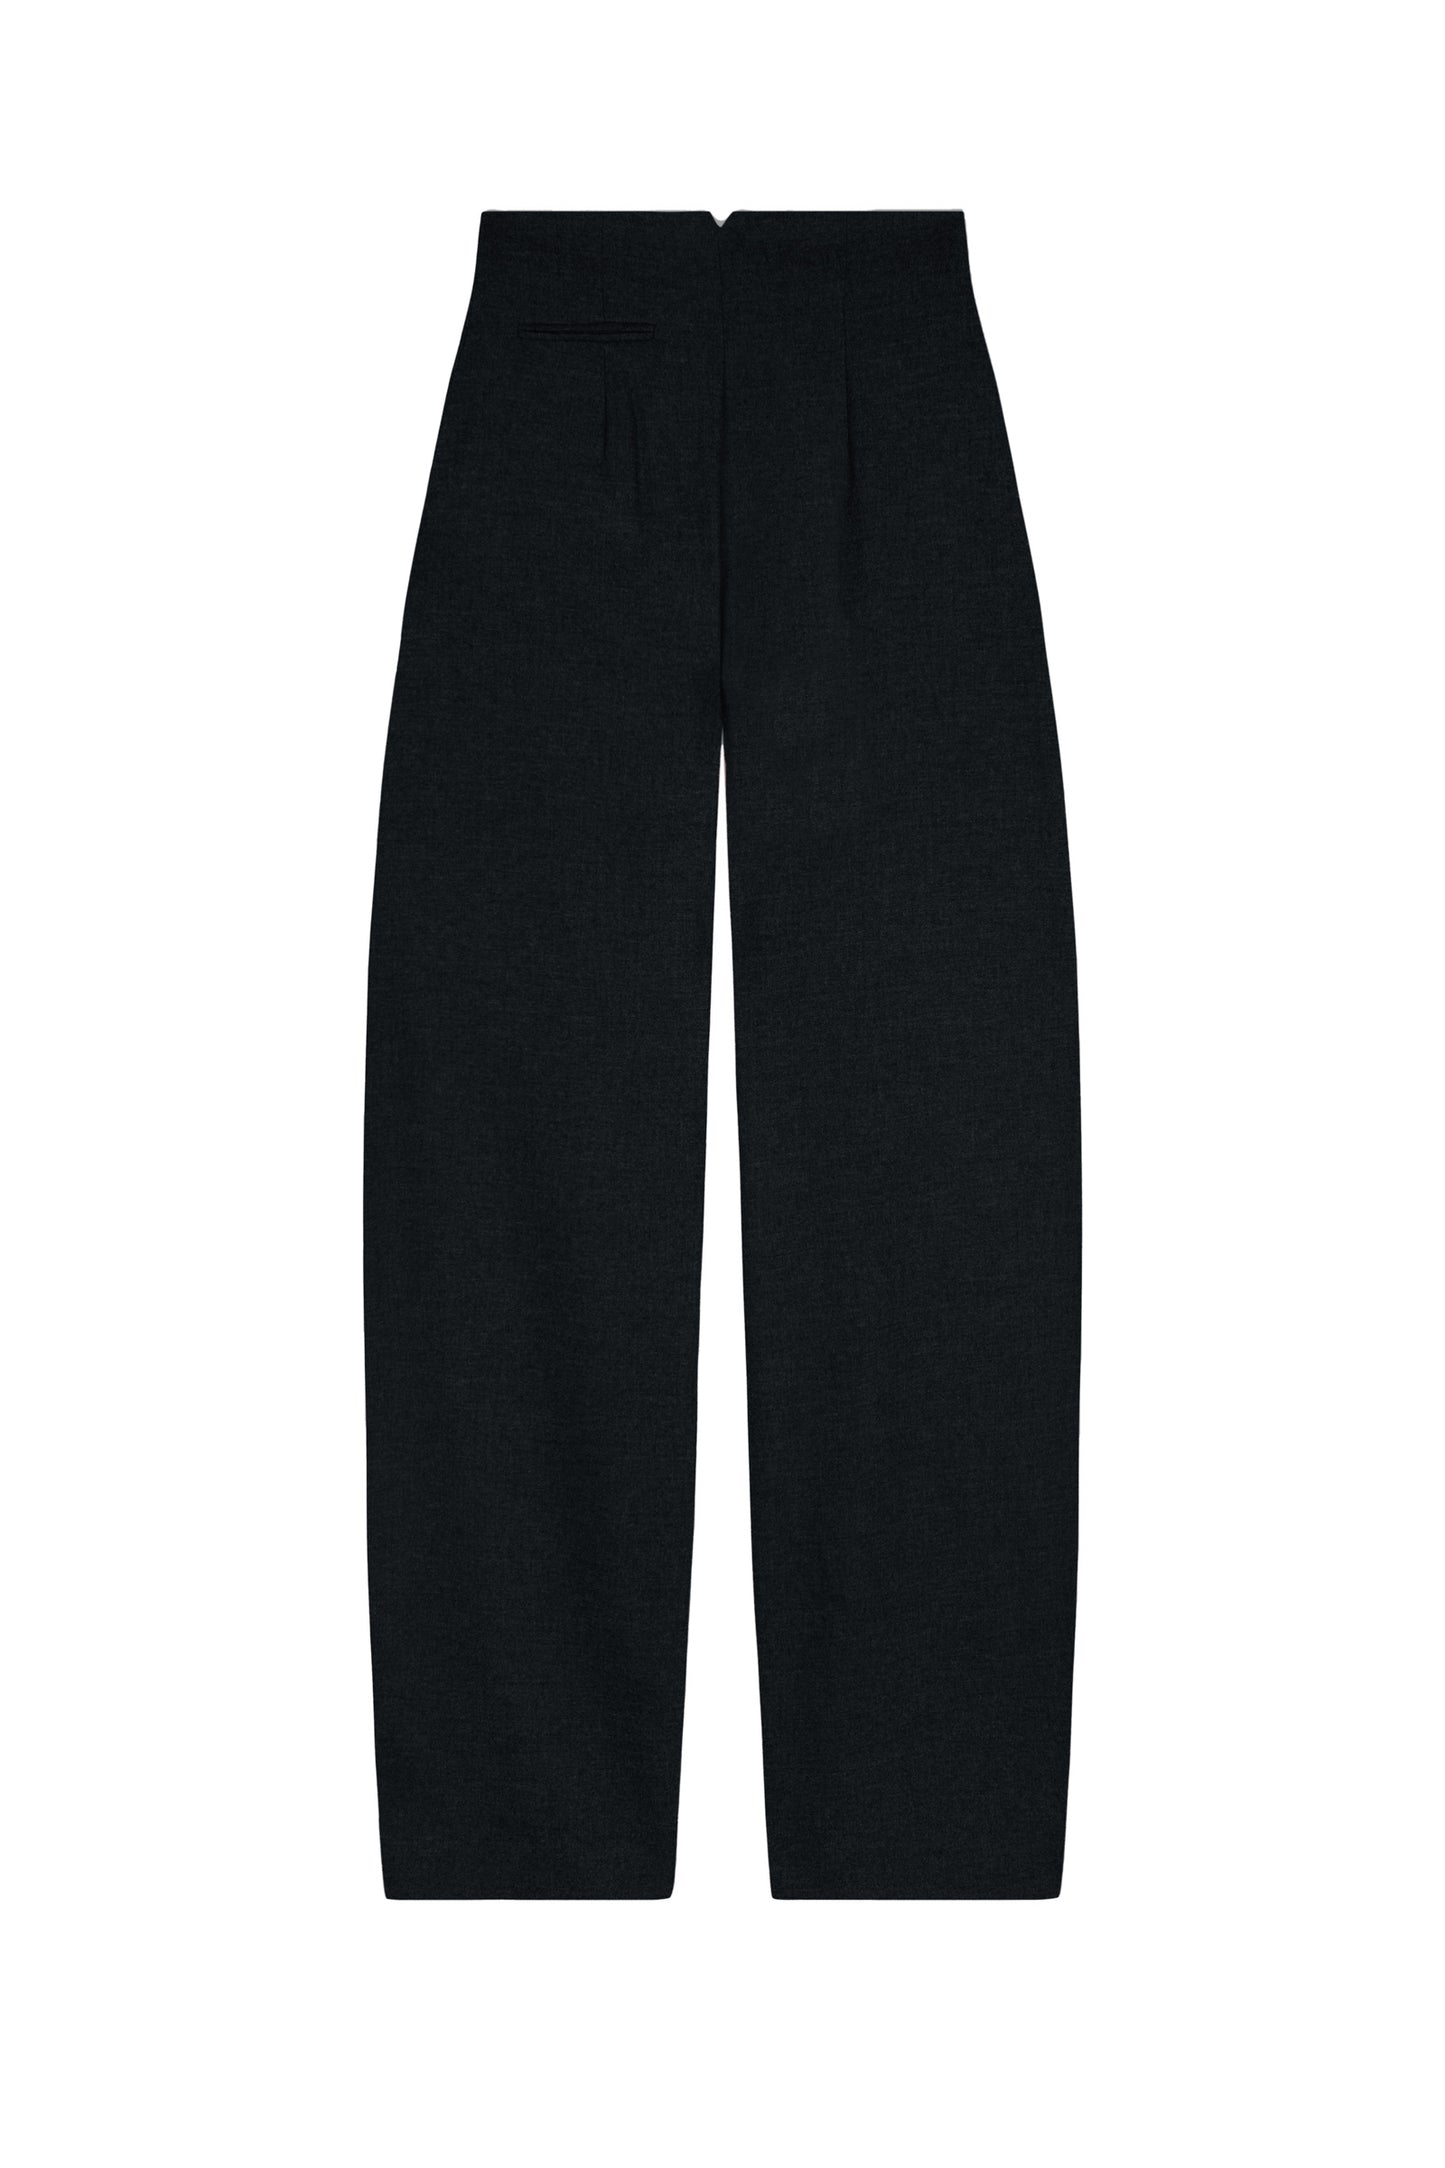 Lanna, black virgin wool and cashmere pants